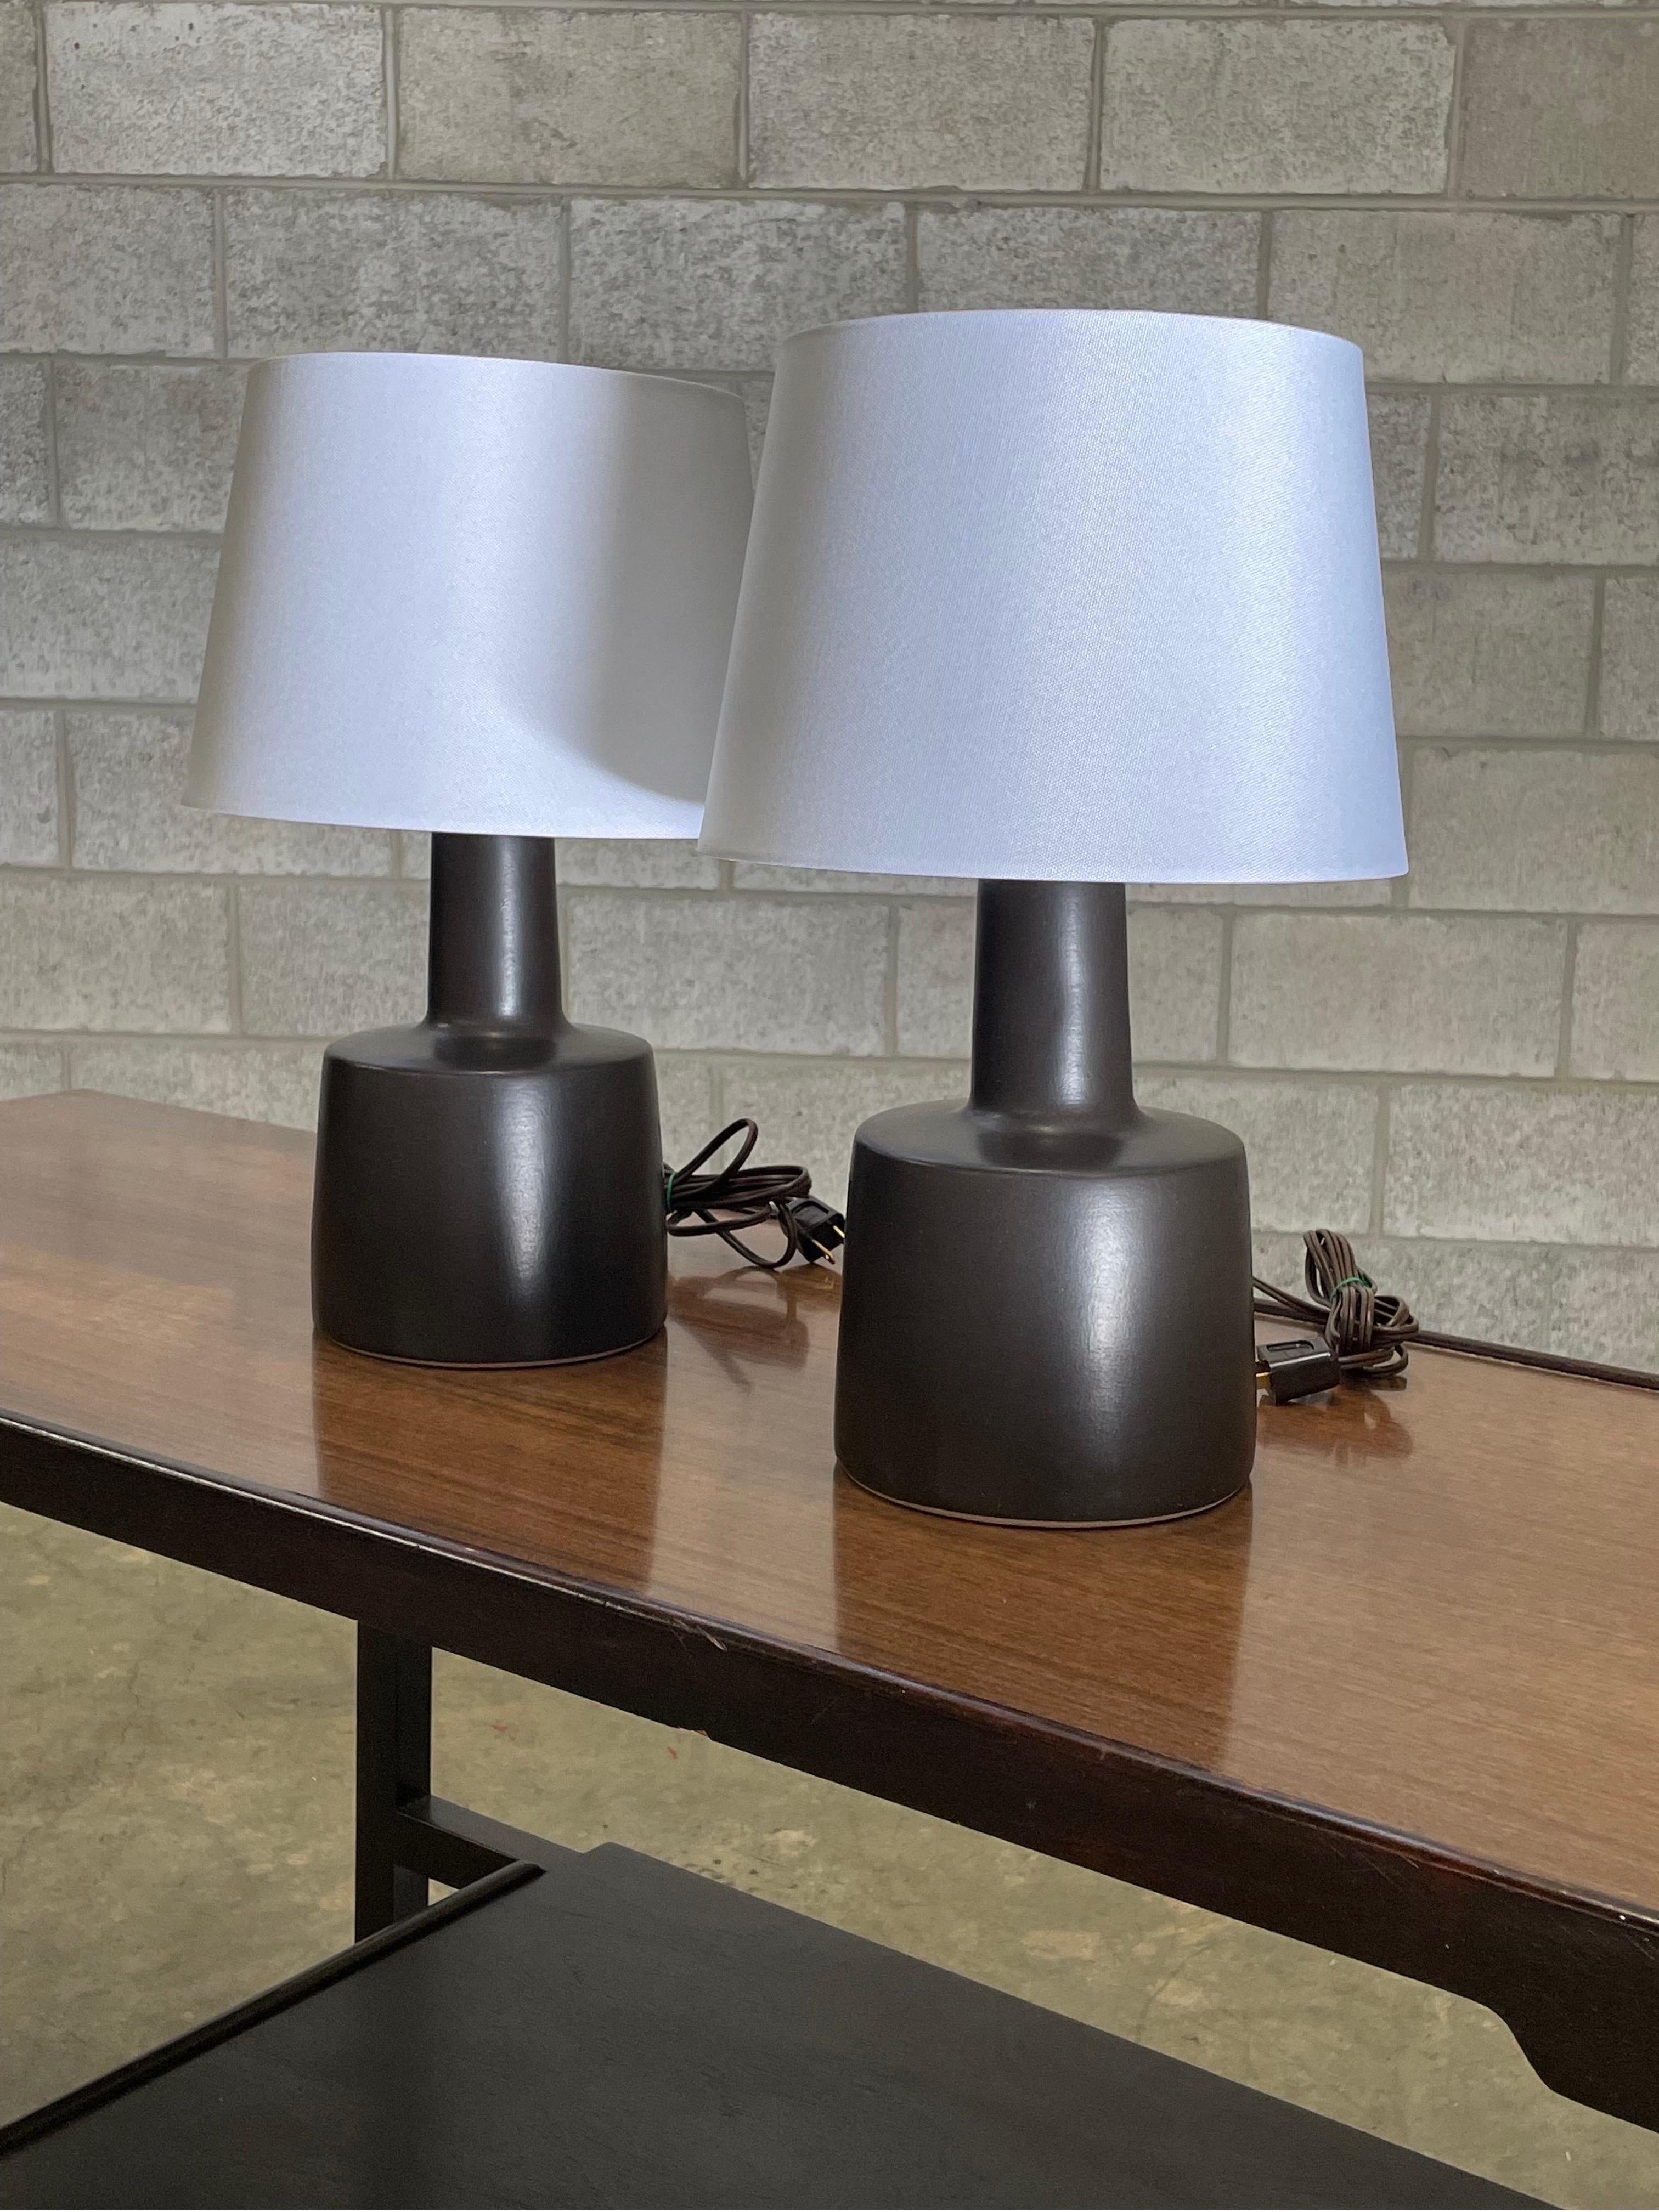 Table lamps designed by ceramicist duo Jane and Gordon Martz for Marshall Studios. Color is matte or flat black. 

Overall dimensions: 16” tall 10” wide 
Ceramic portion only 9” tall 6” across.